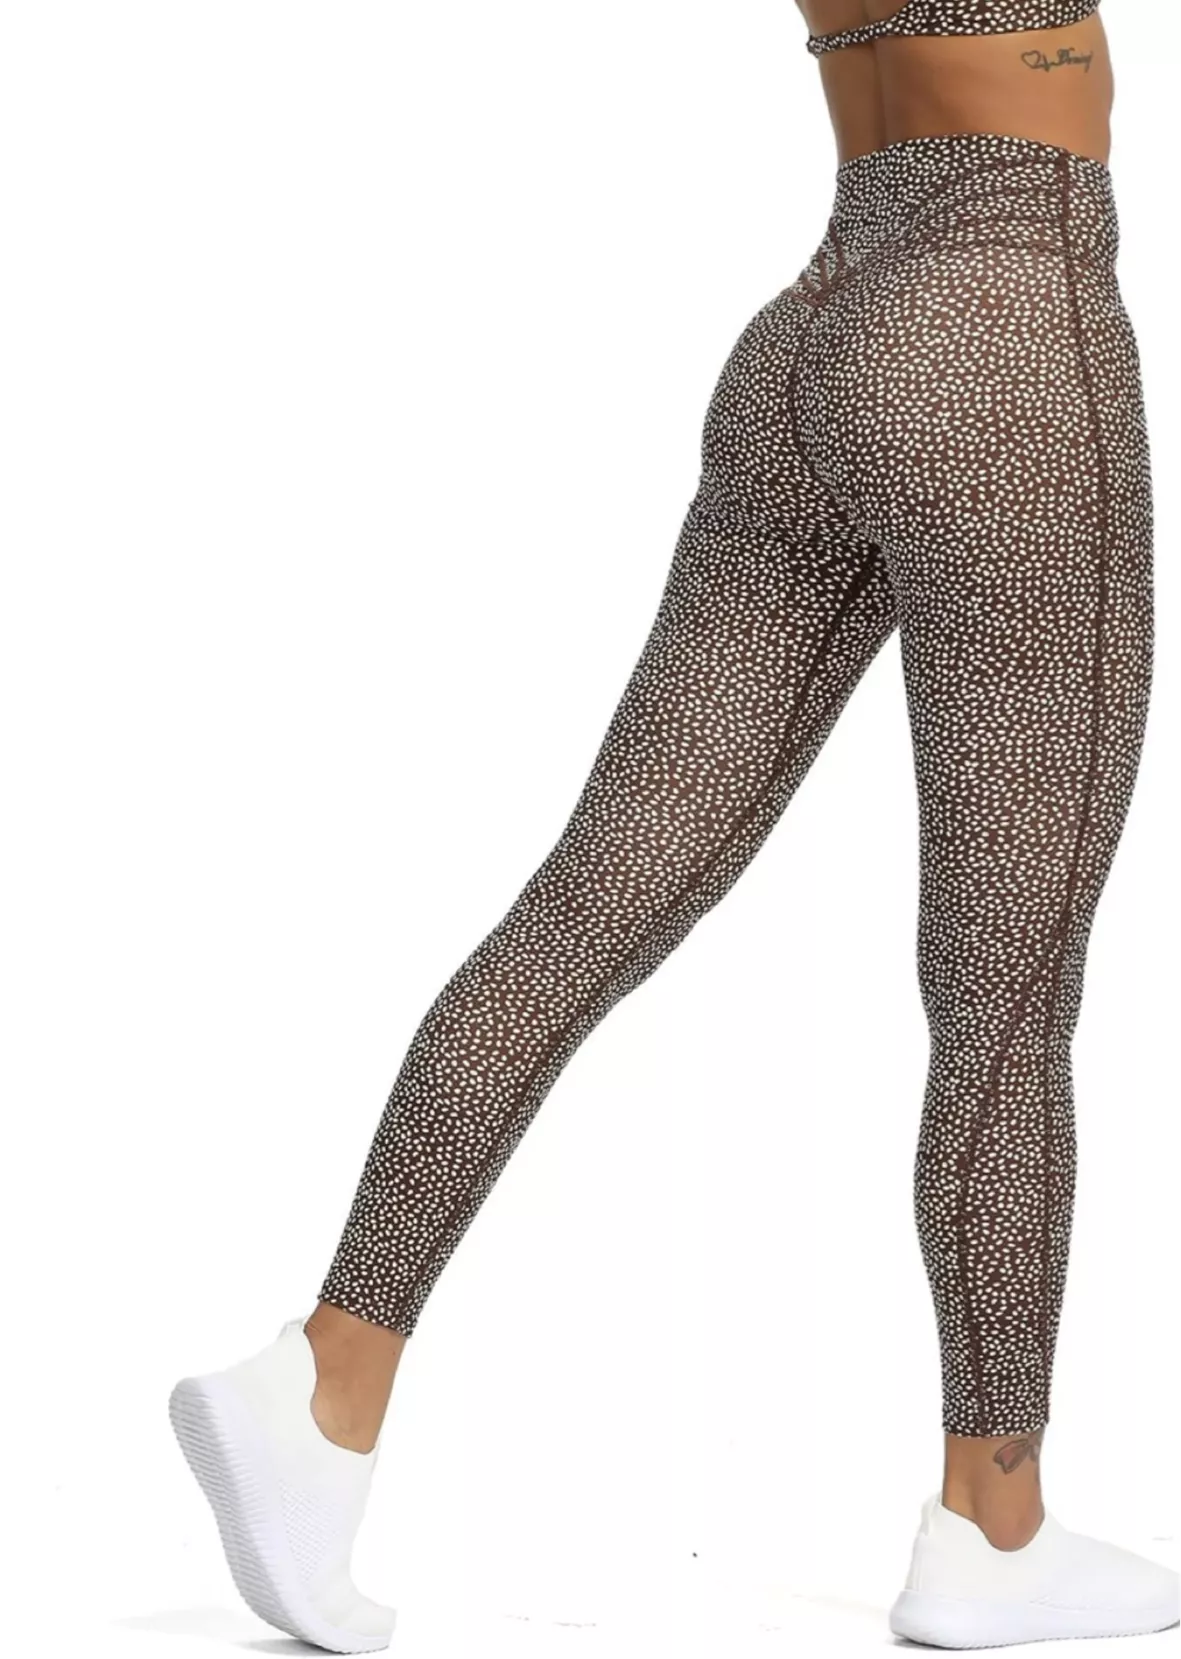 SOLY HUX High Waisted Leopard Print Leggings for Women Yoga Workout Pants  with Pockets Tummy Control Leggings